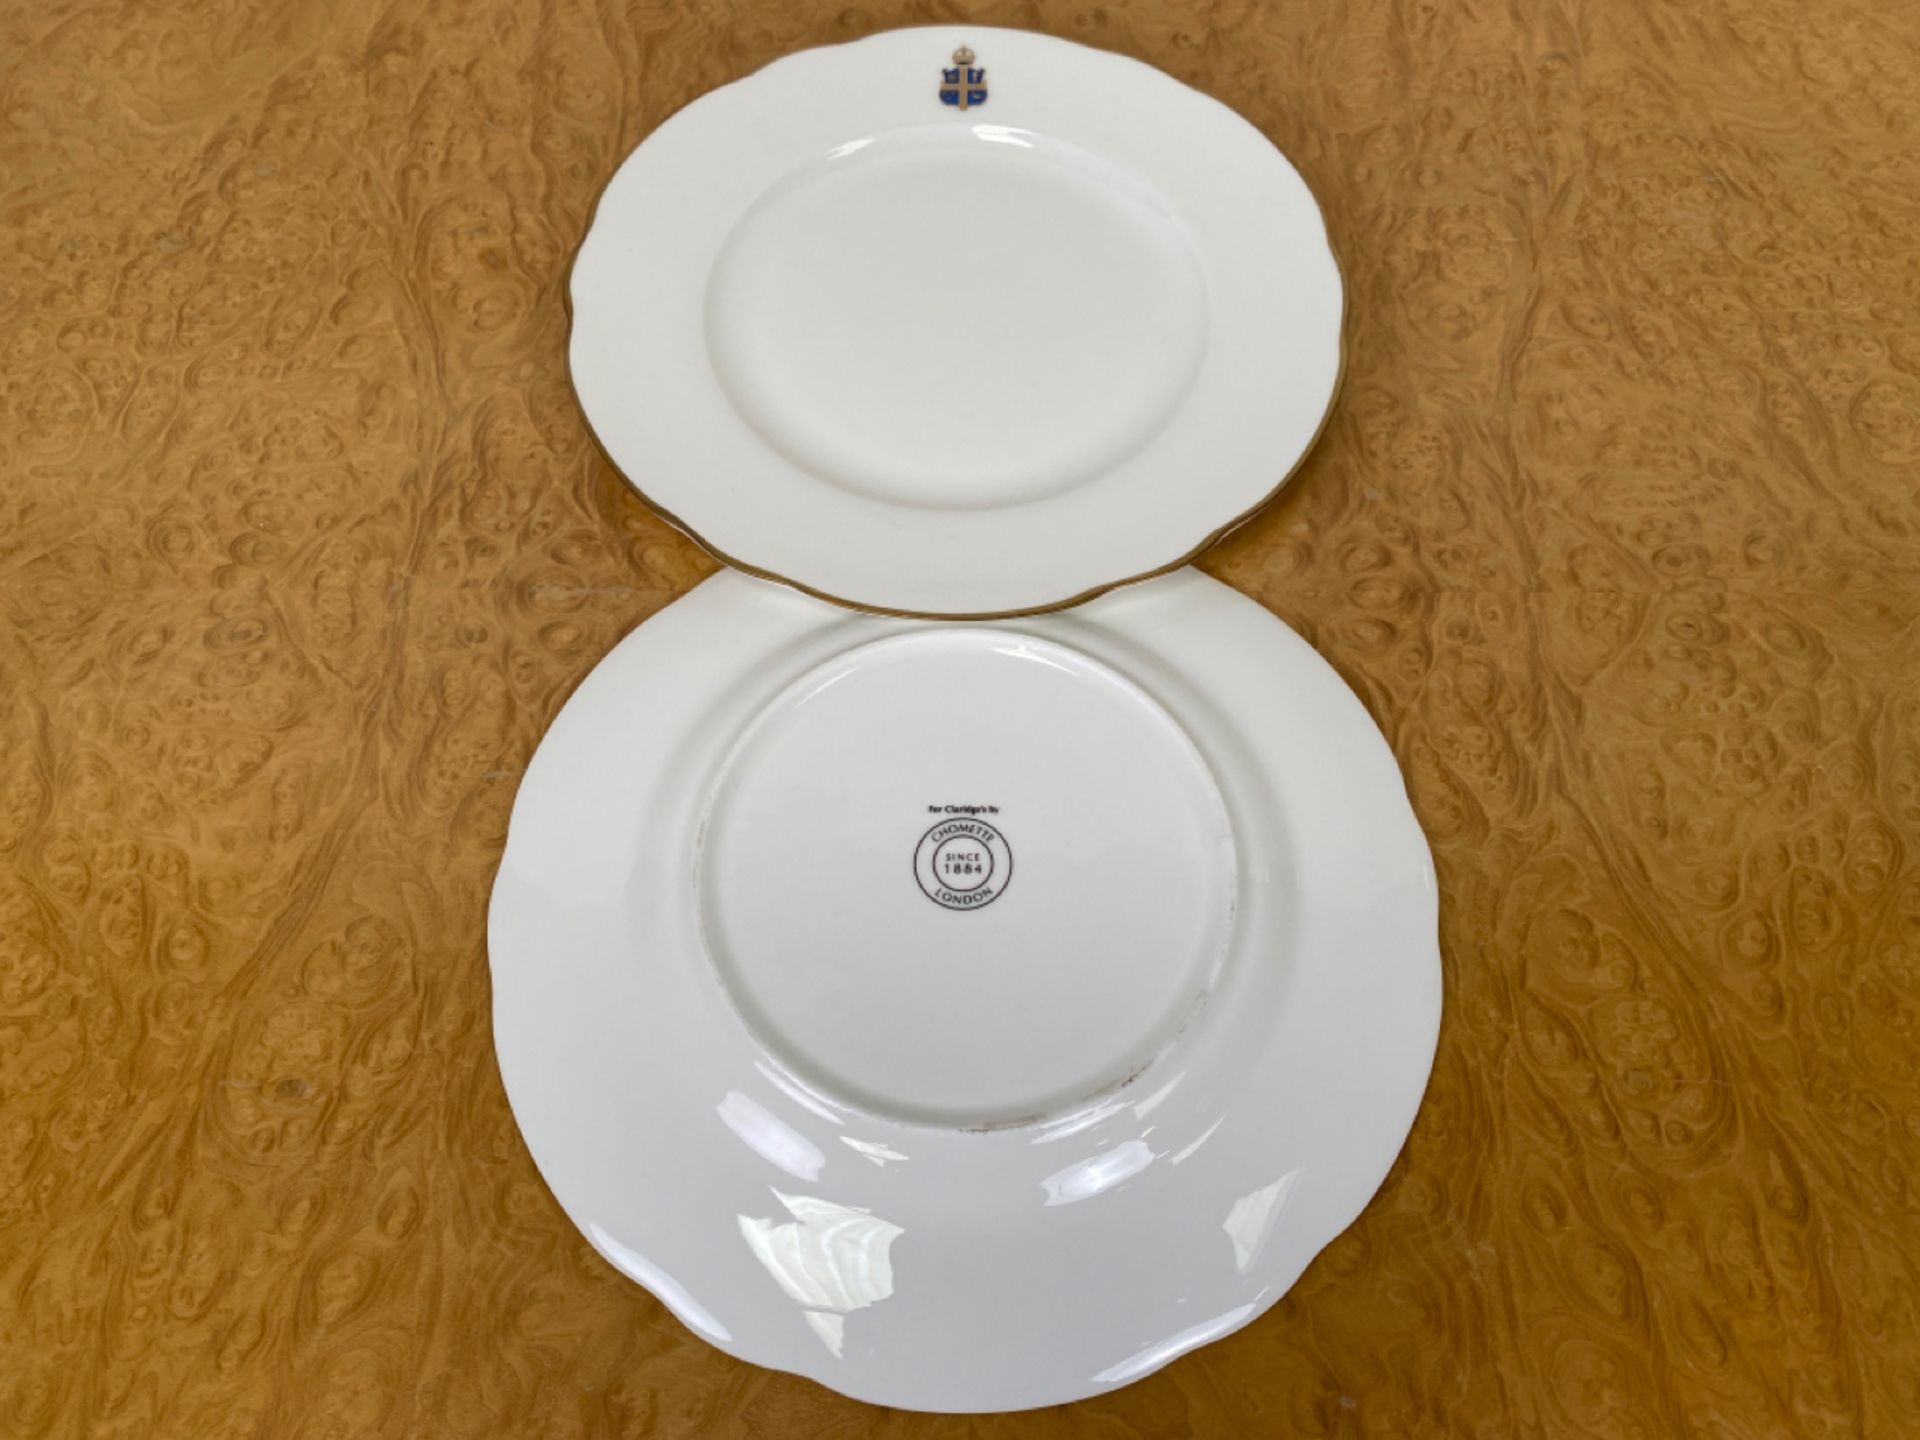 Set of 16 Crested Plates for Claridge's by Chommette 1884 (25cm and 31.5cm) - Image 9 of 9